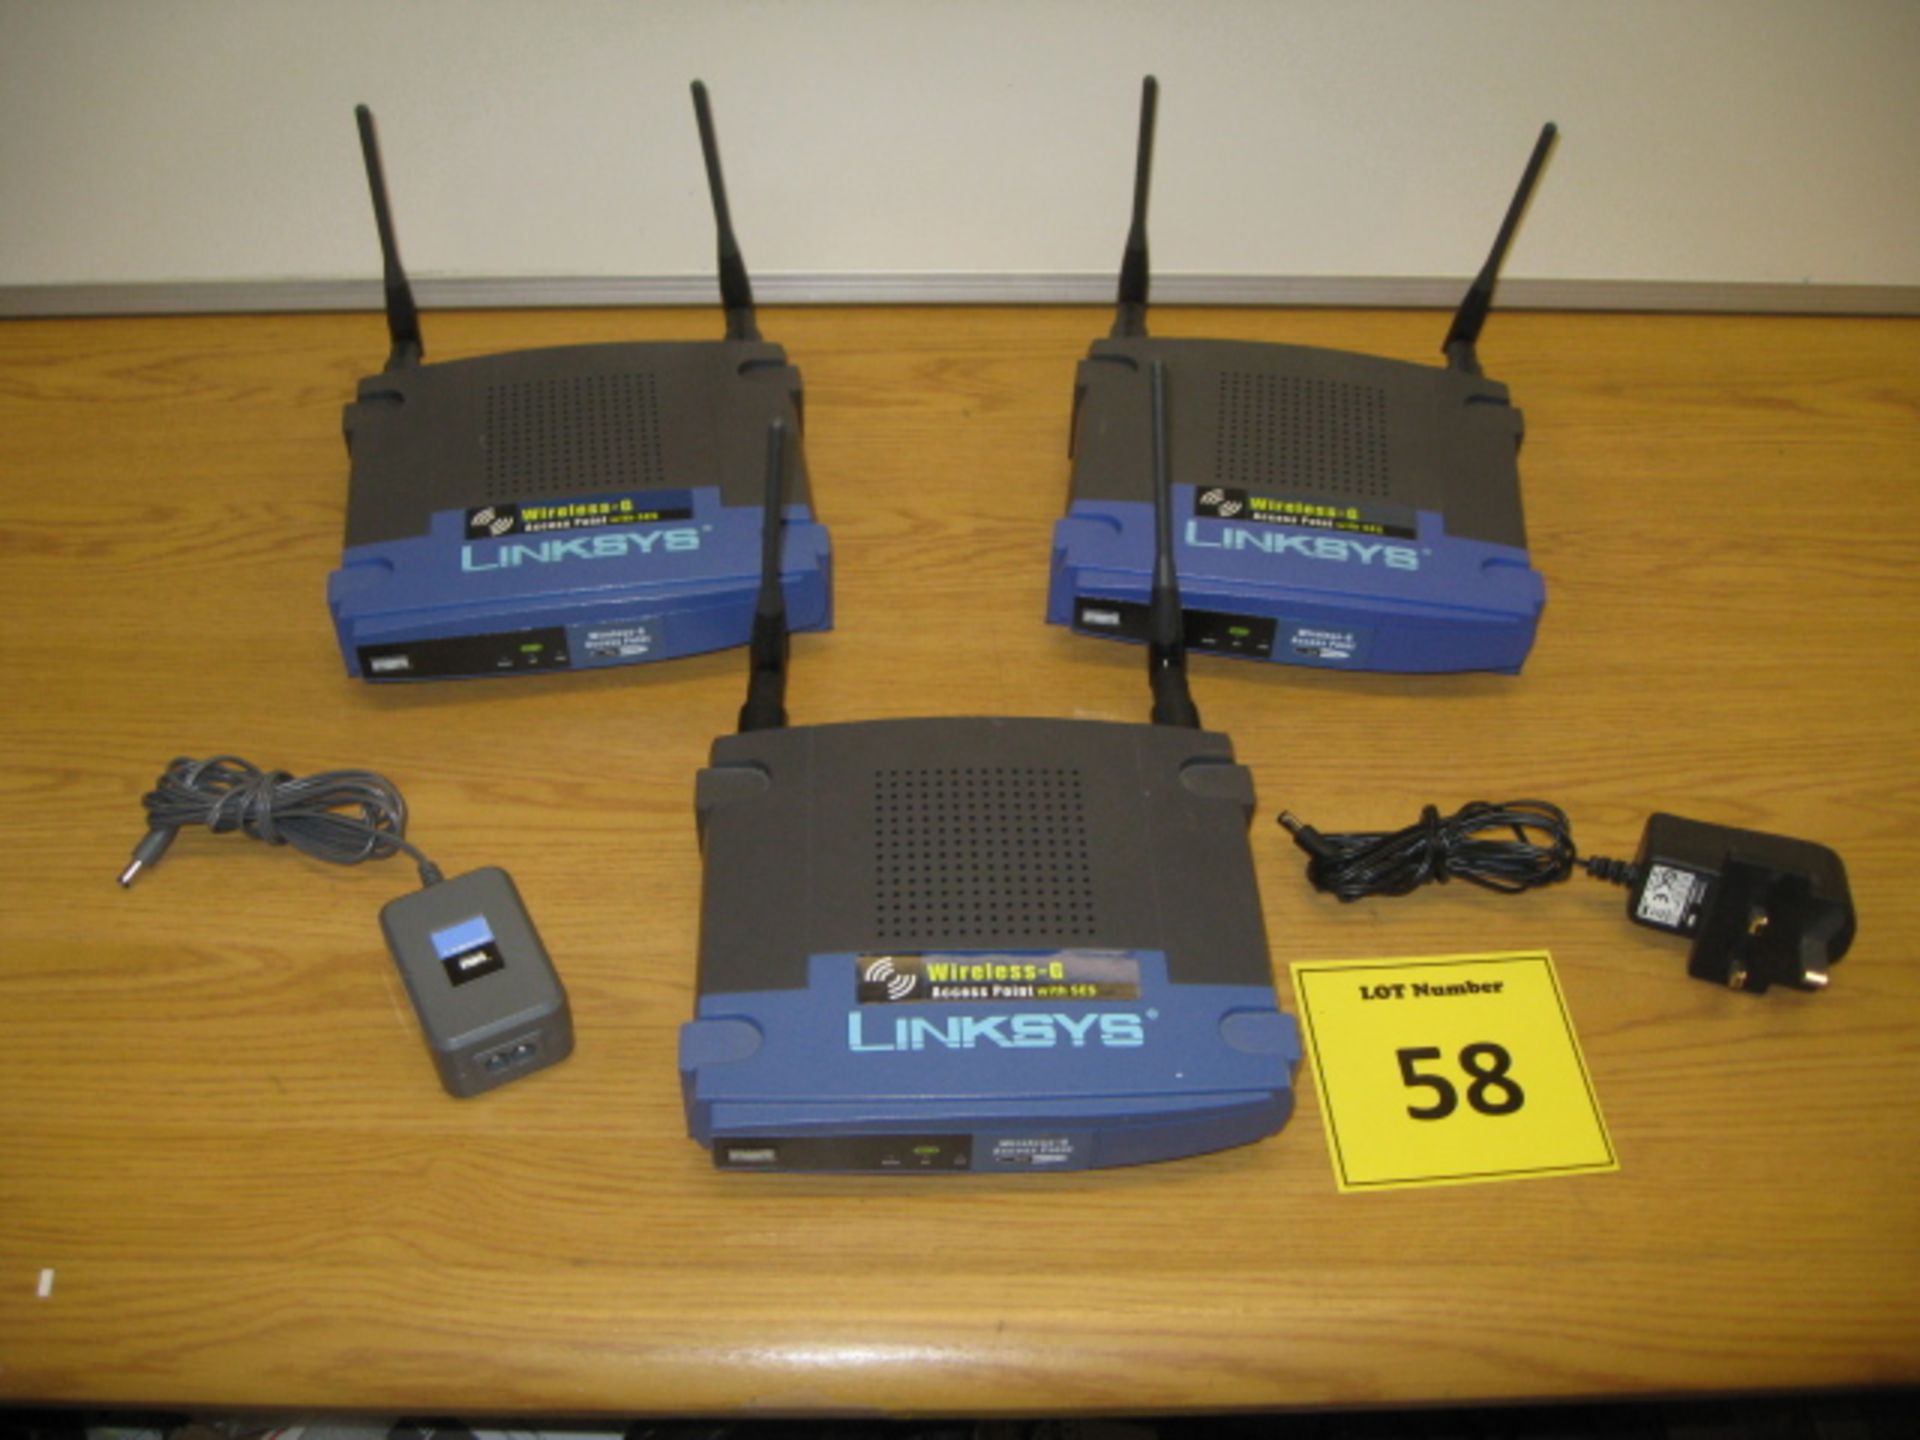 3 X CISCO LINKSYS WIRELESS ACCESS POINTS WITH SES. MODEL WA P54G. WITH 2 X LINKSYS POWER SUPPLIES